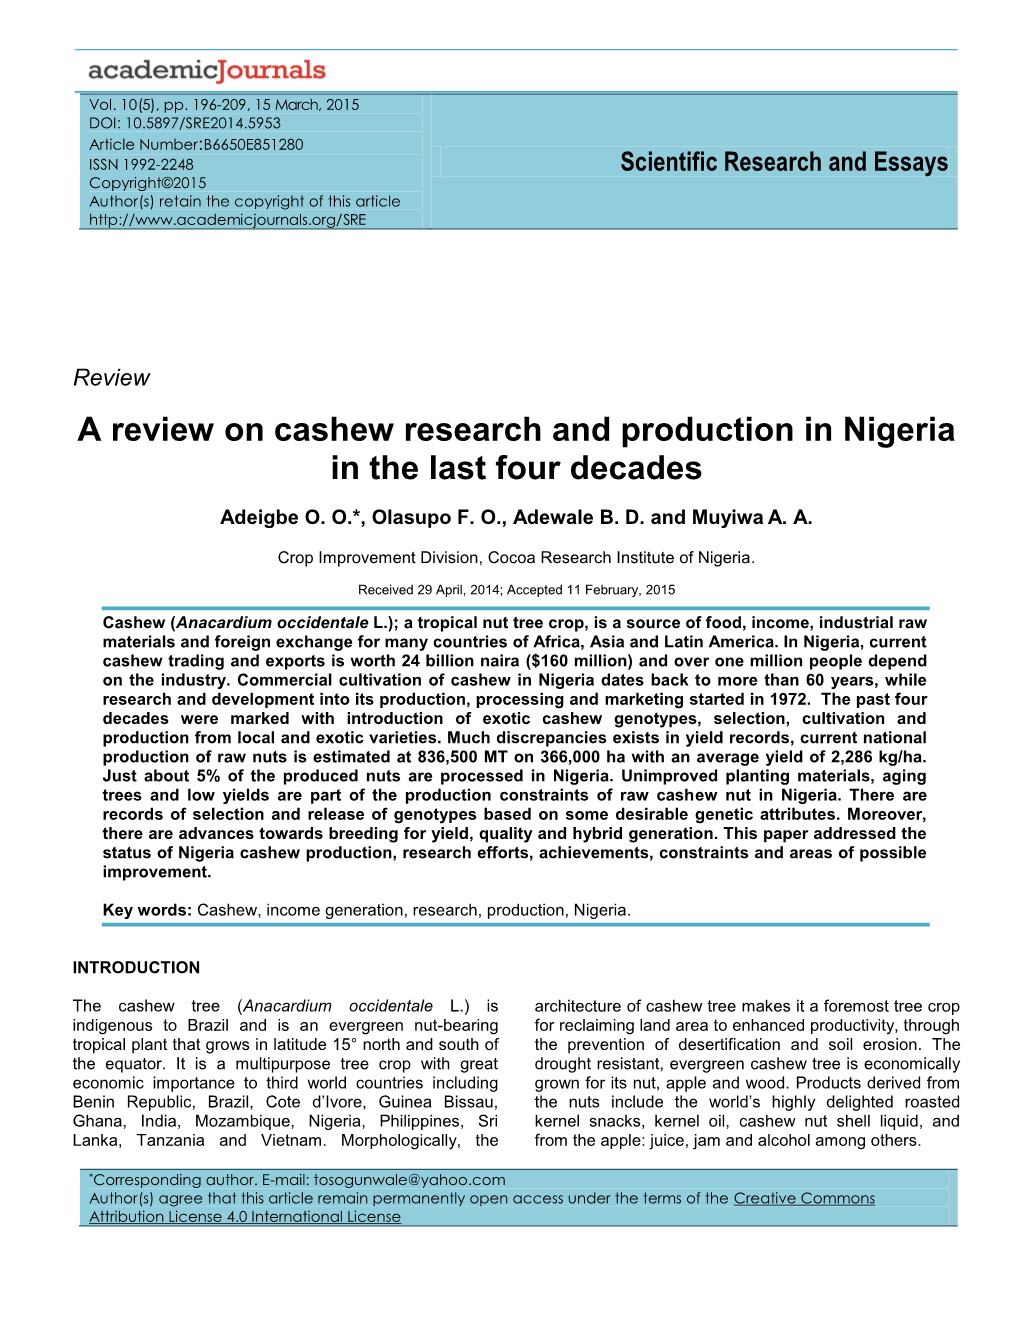 A Review on Cashew Research and Production in Nigeria in the Last Four Decades